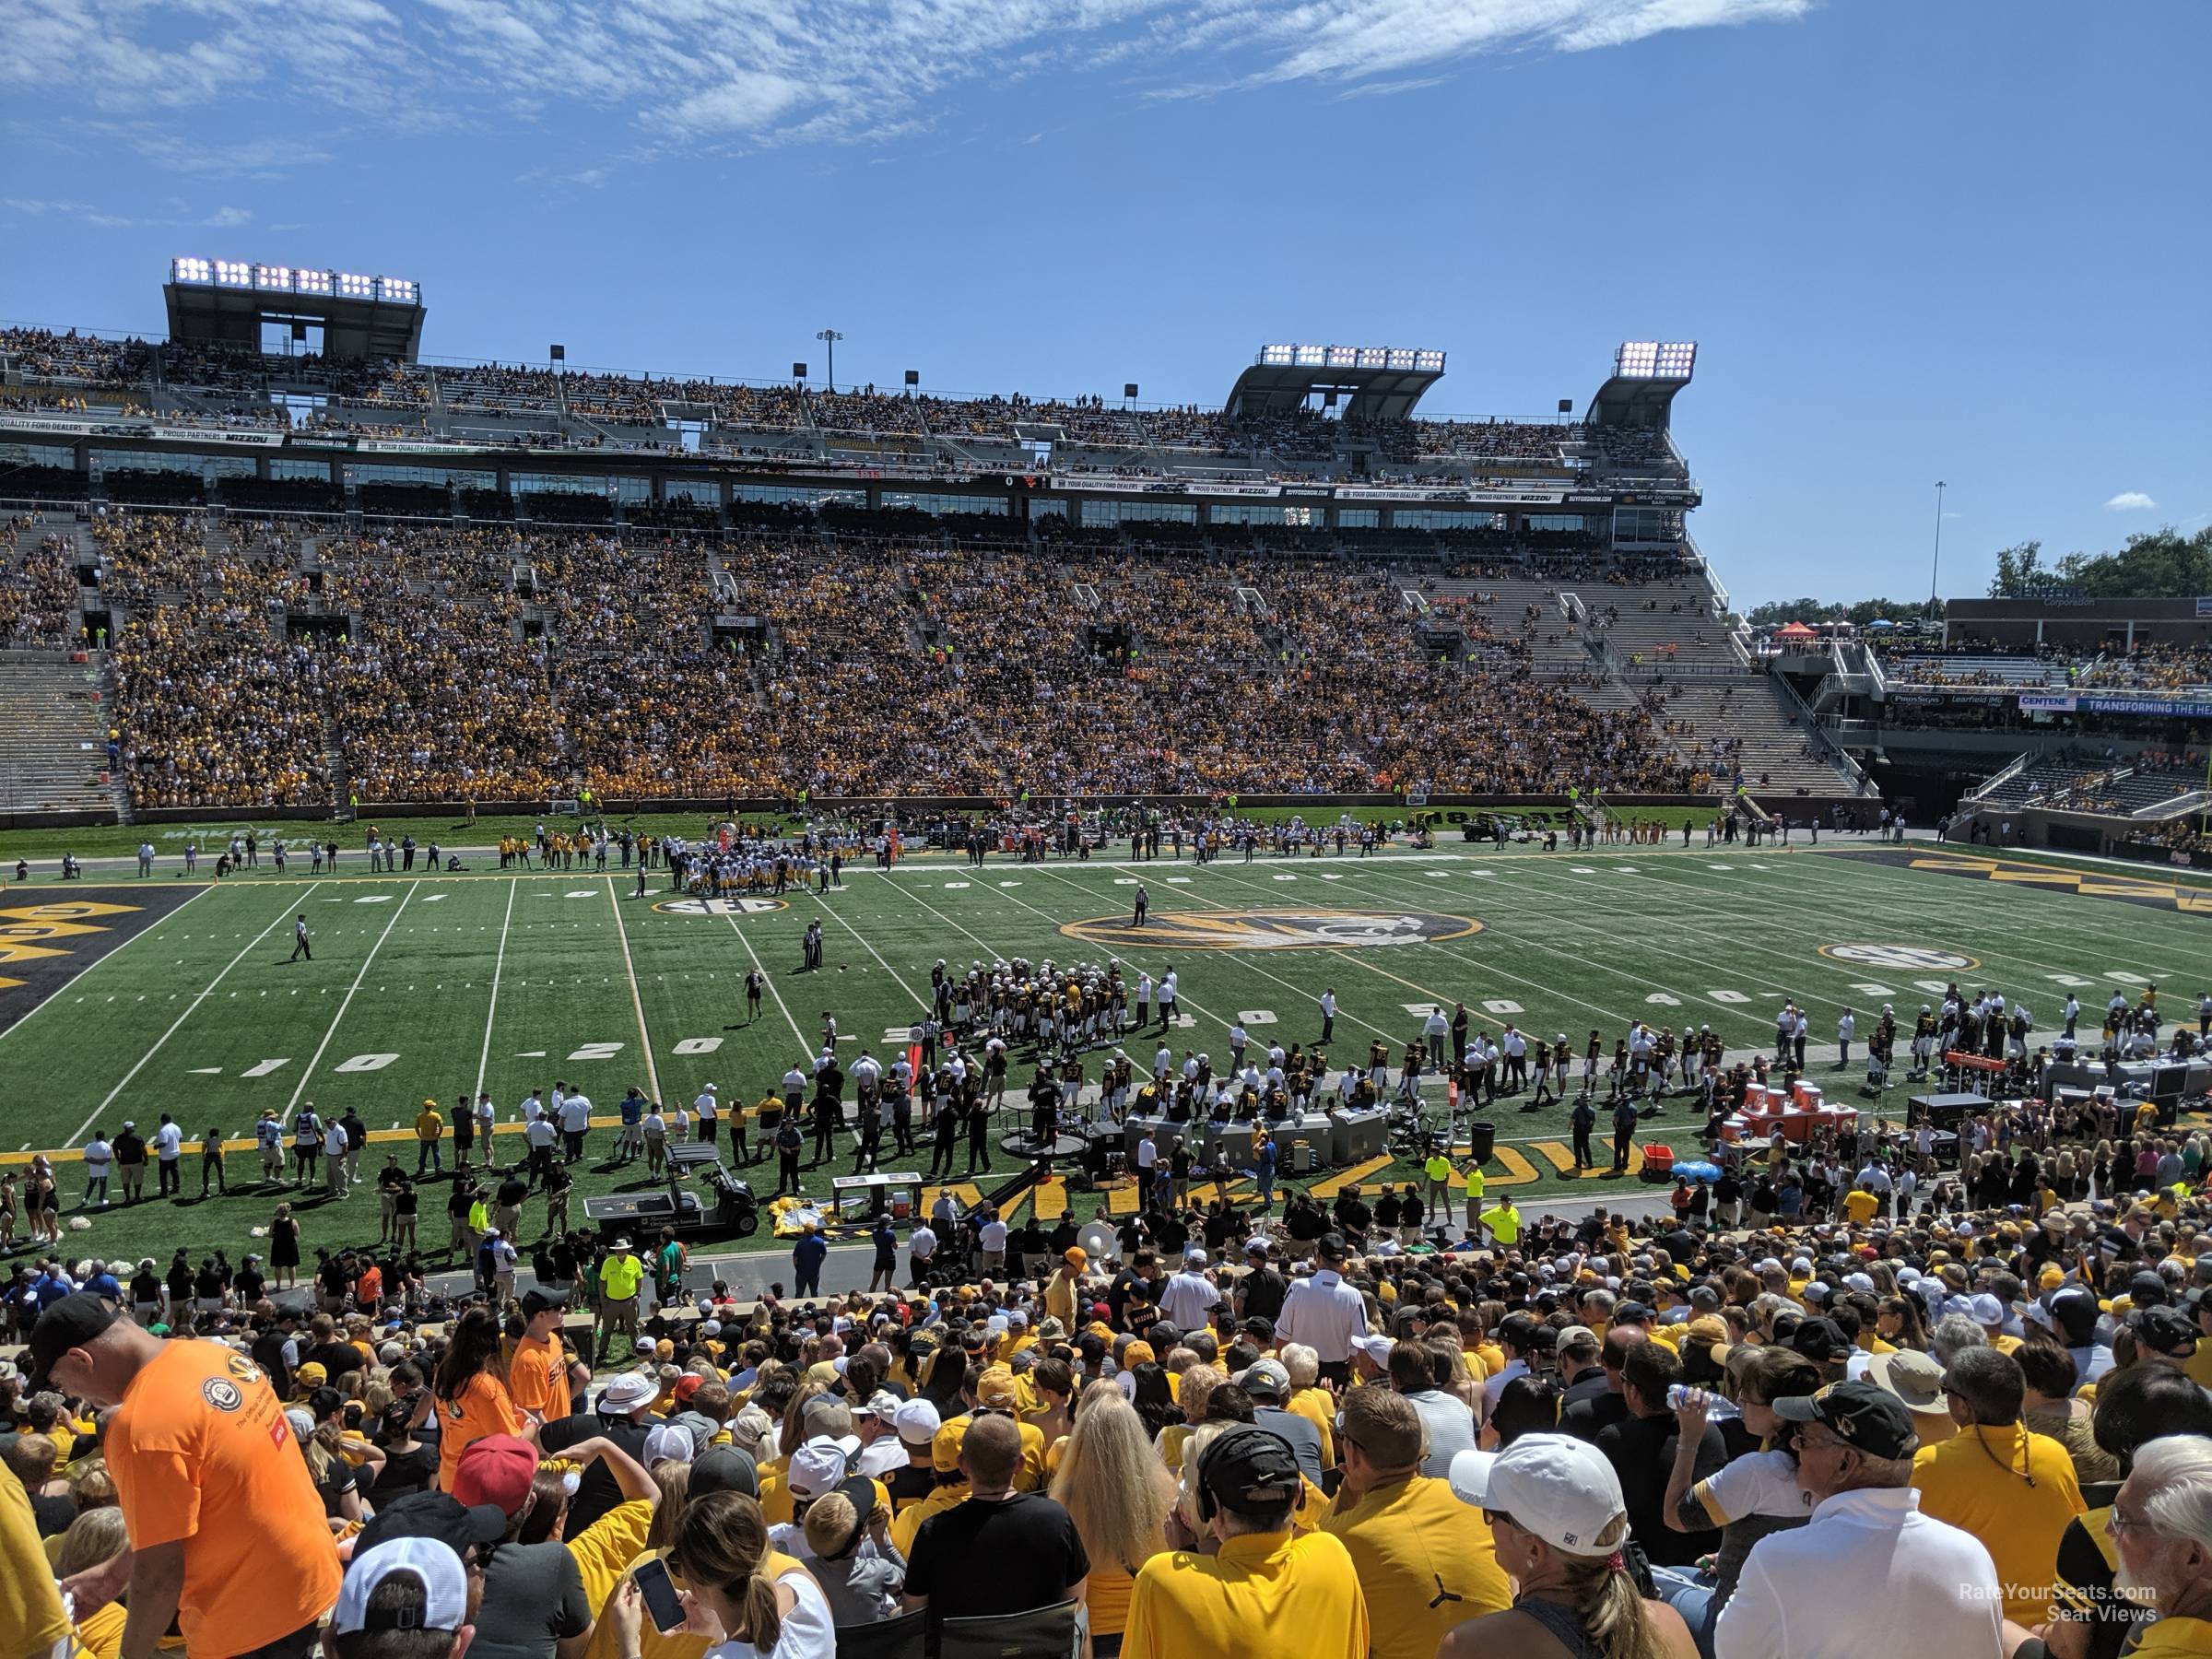 section 119, row 38 seat view  - faurot field